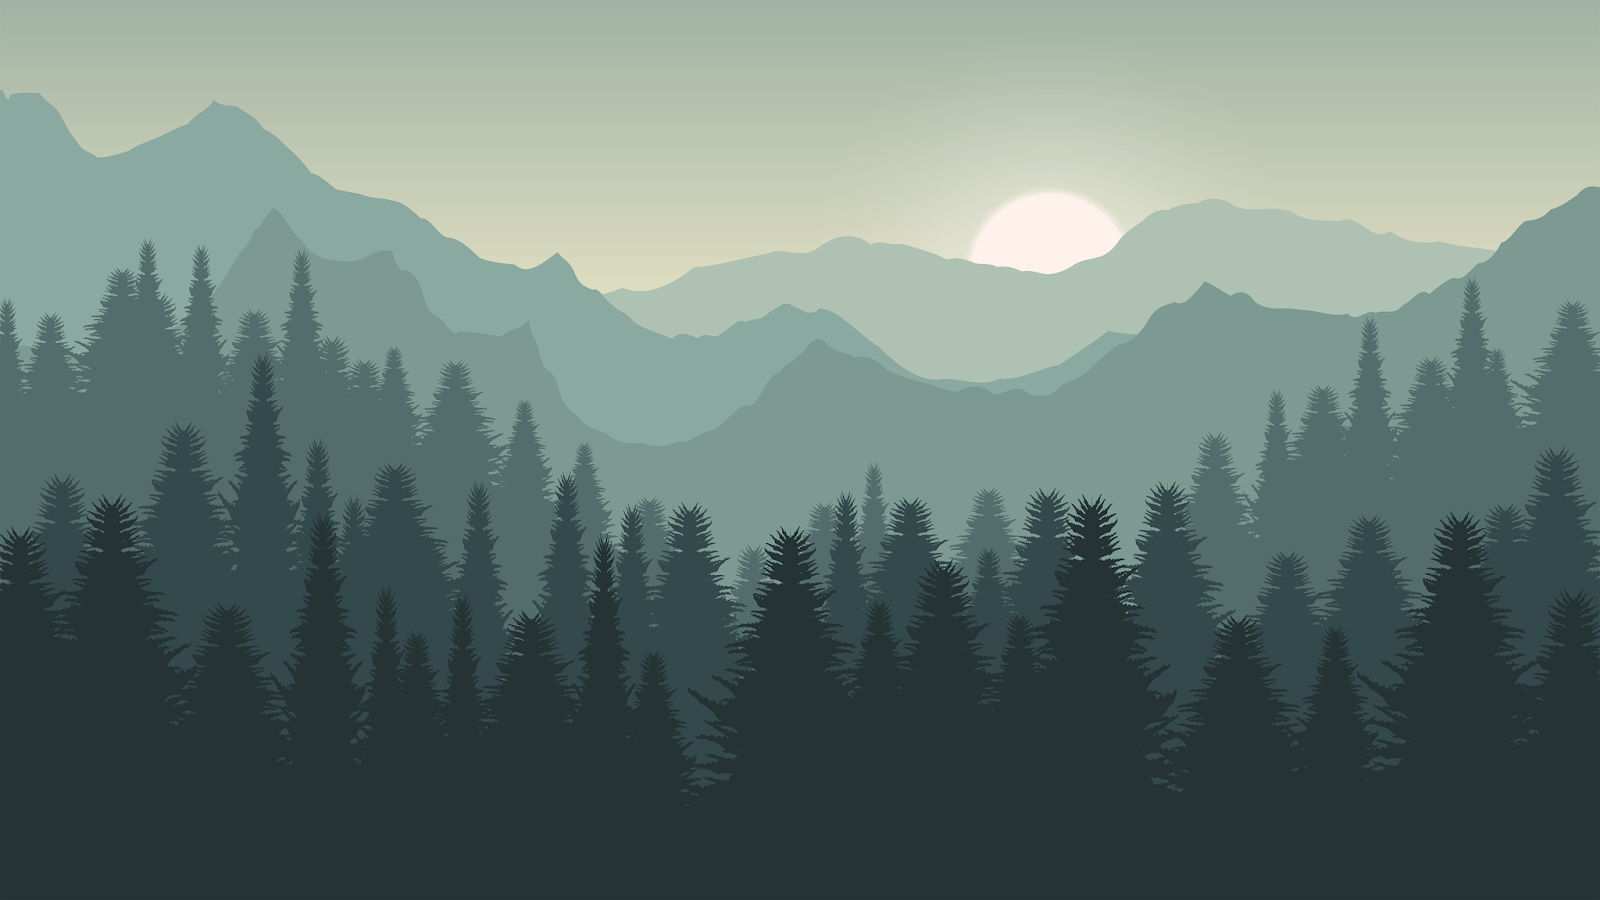 A landscape of a forest with mountains in the background - Forest